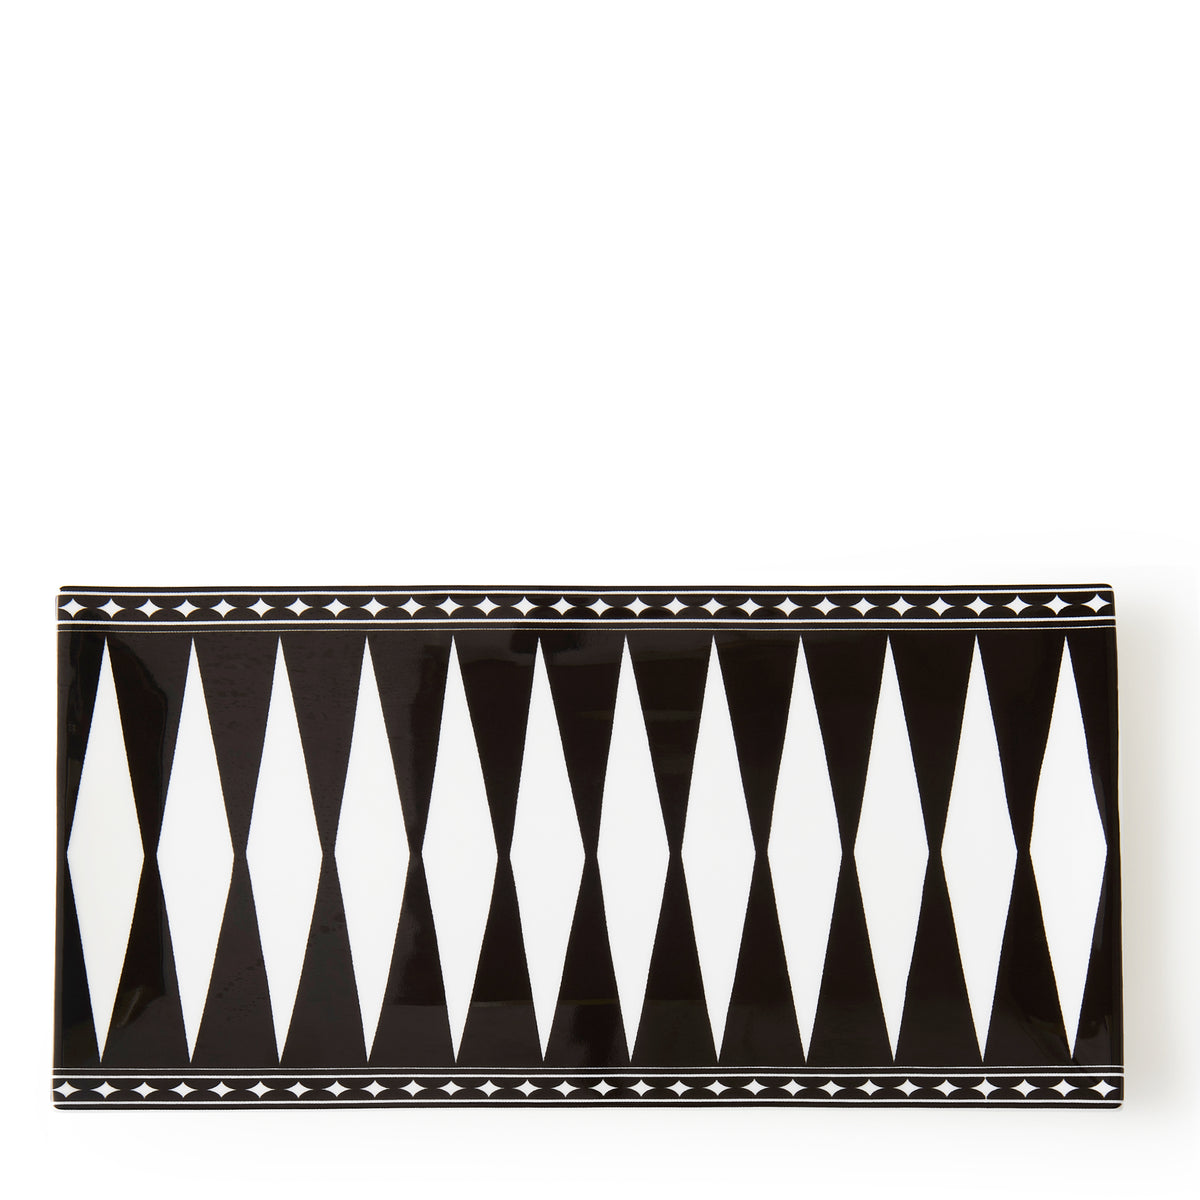 A rectangular bone china tray featuring a black and white geometric pattern with a diamond design along the center and a border of small triangles, perfect for serving appetizers, the Marrakech Large Sushi Tray by Caskata.